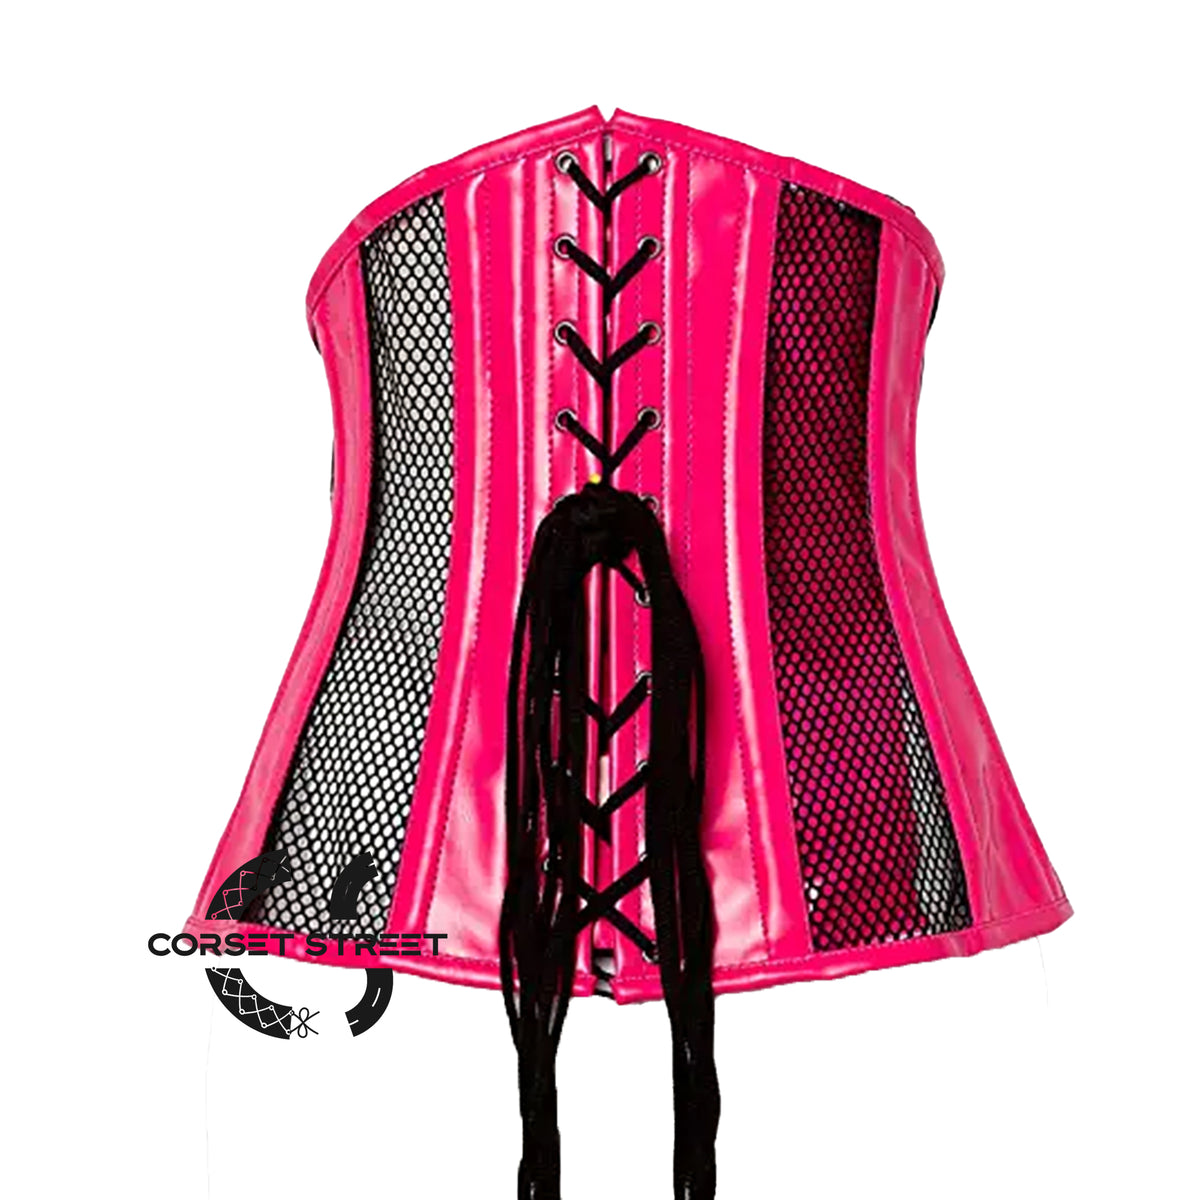 Hot Pink PVC Leather With Black Mesh Steampunk Costume Basque Underbust Corset